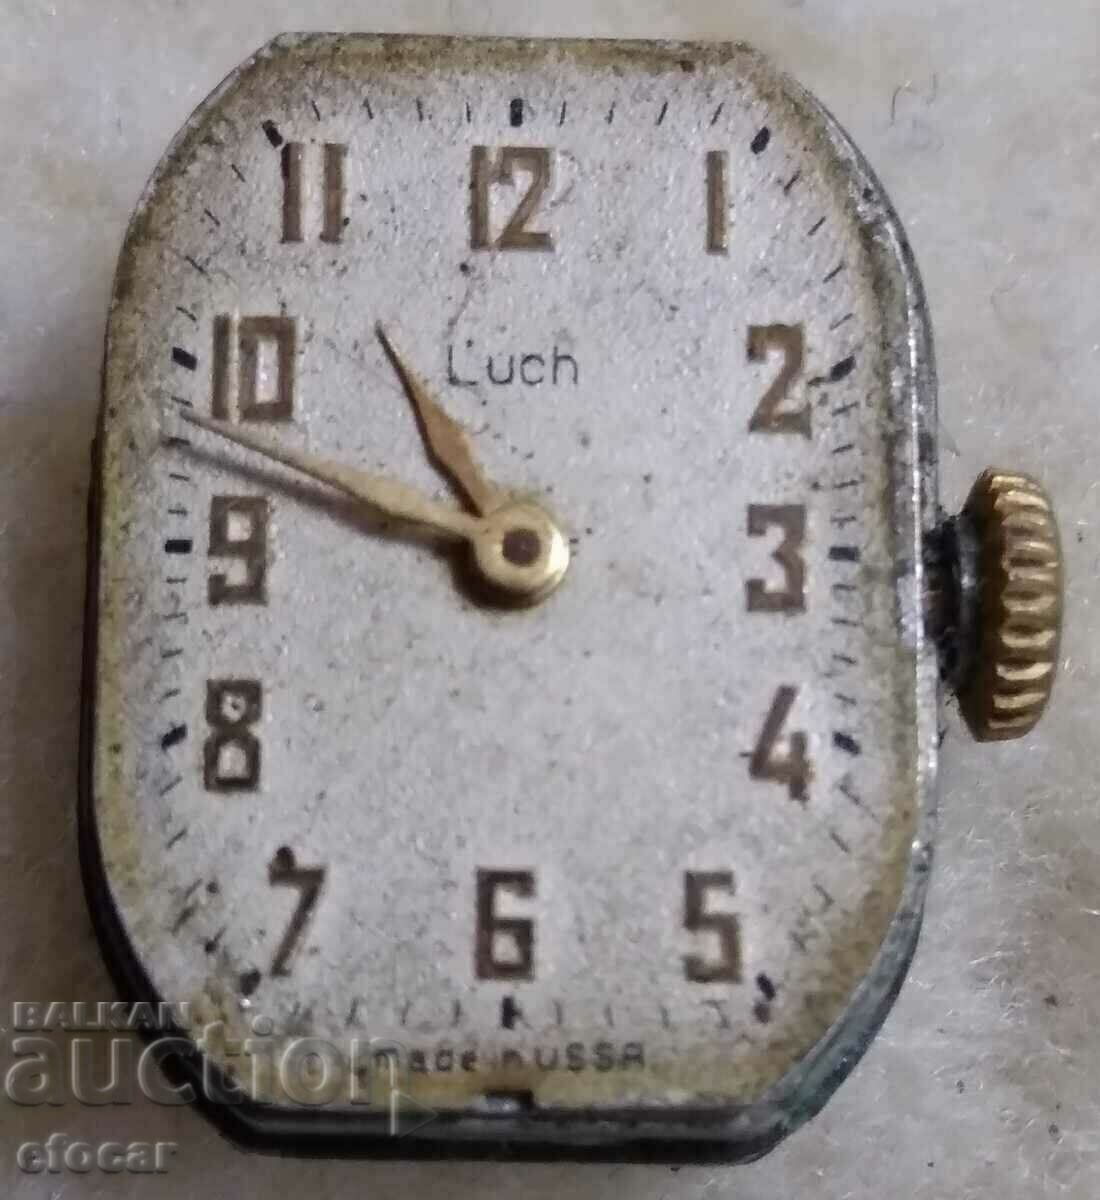 Clock Luch start from 0.01st